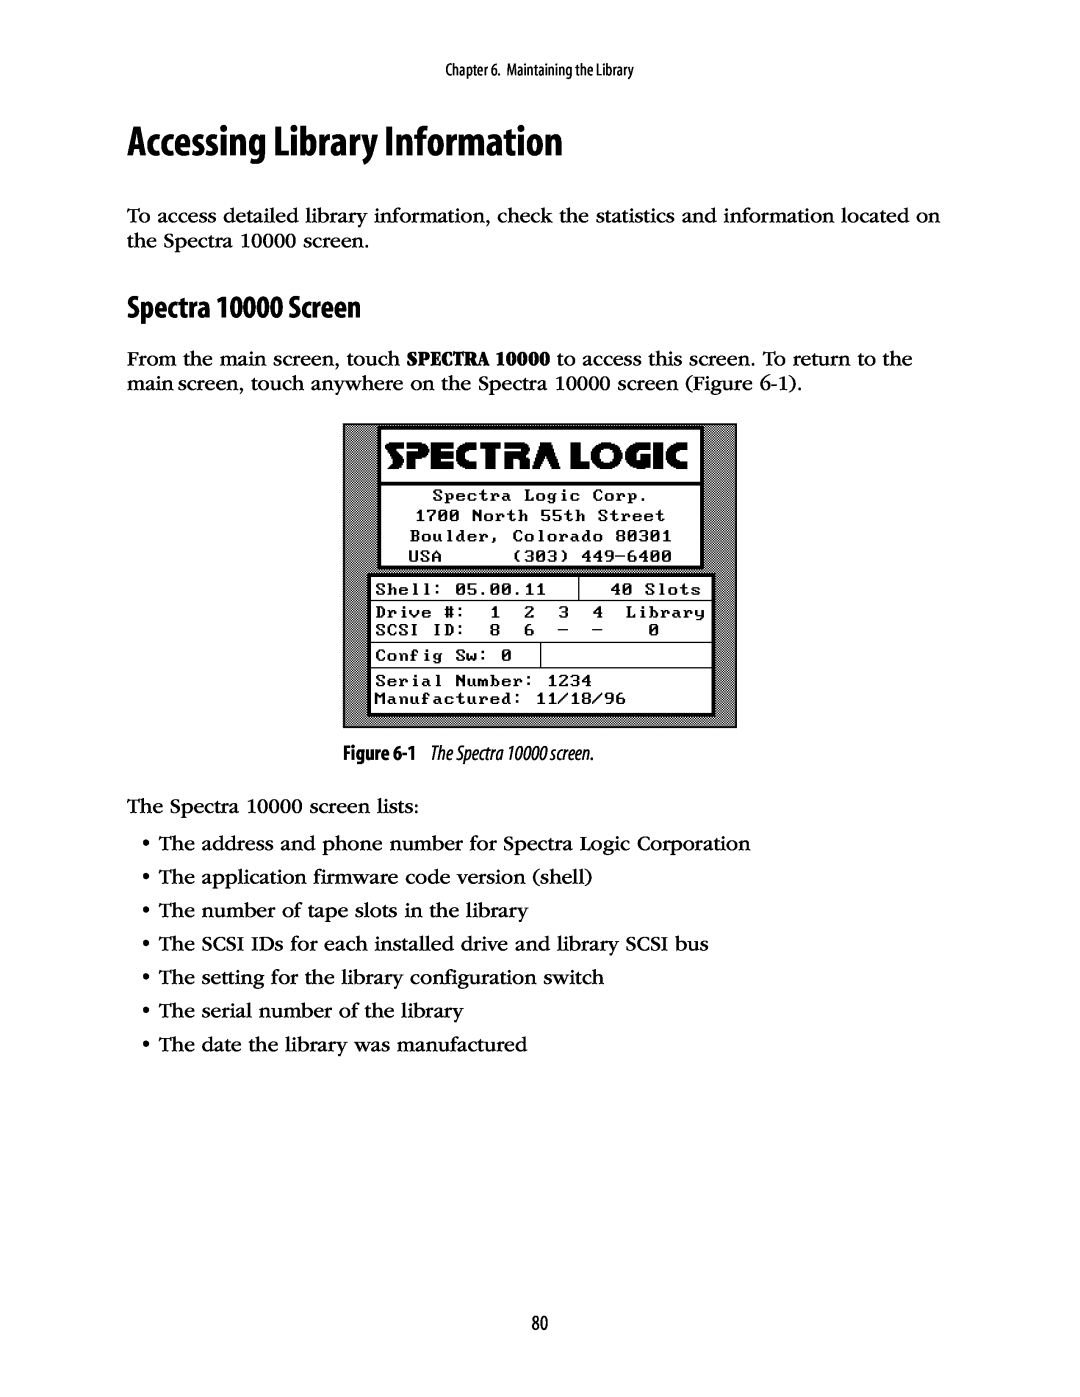 Spectra Logic manual Accessing Library Information, Spectra 10000 Screen, 1 The Spectra 10000 screen 